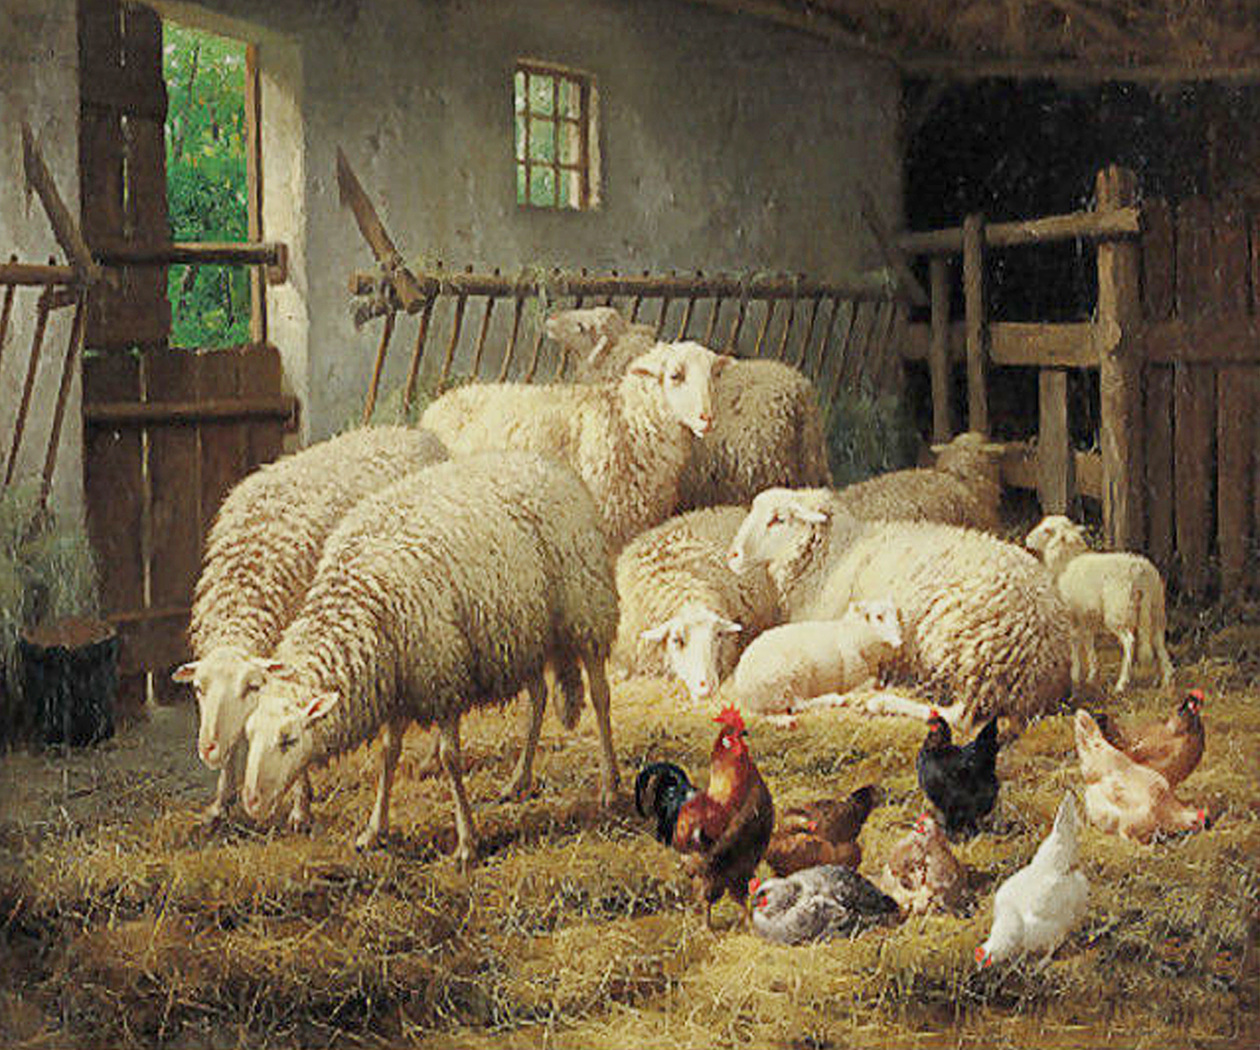 Farm/Pastoral Farm Sheep and Chickens Framed Oil Painting ...